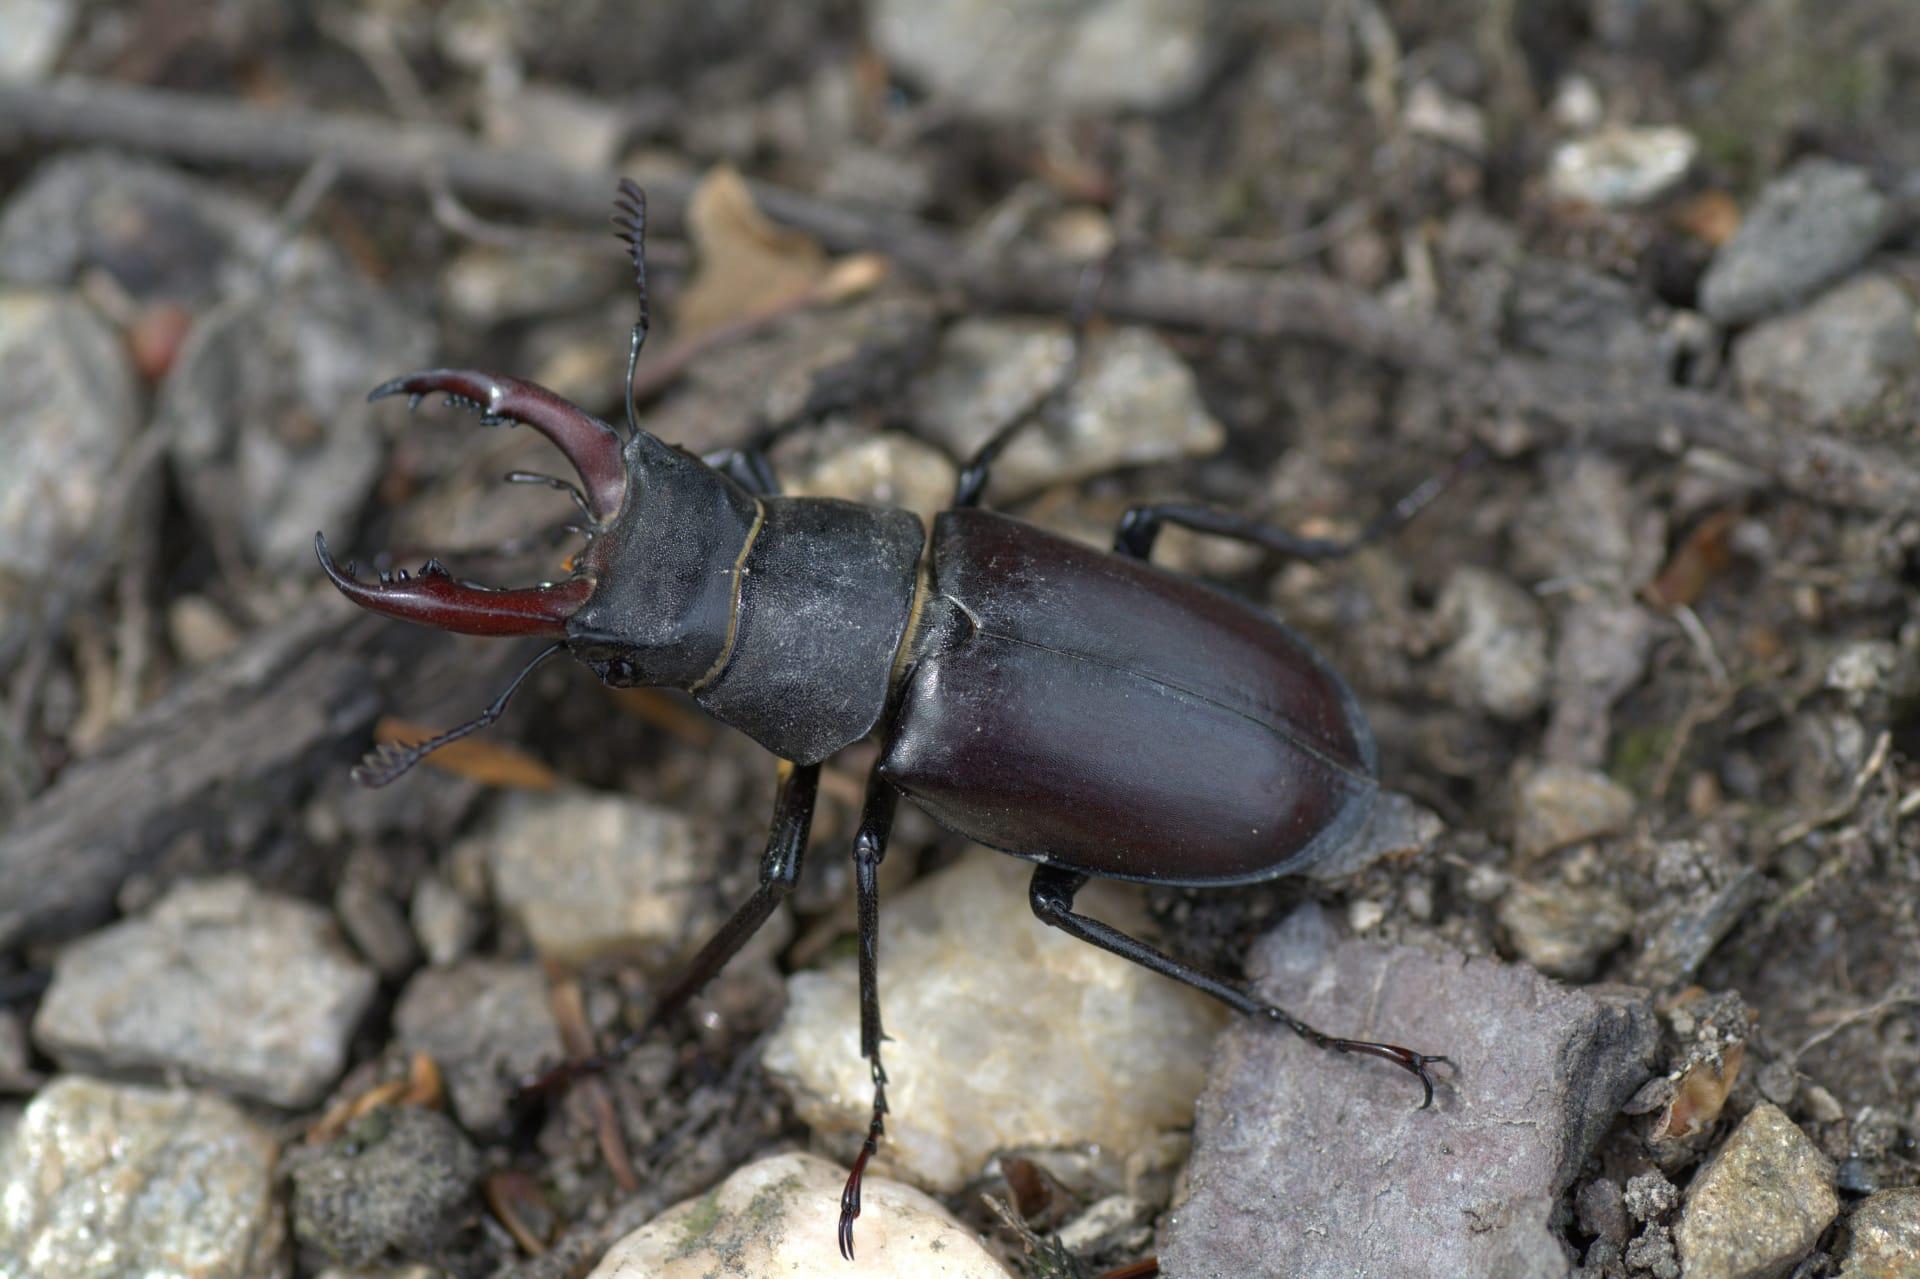 Stag beetle pictures